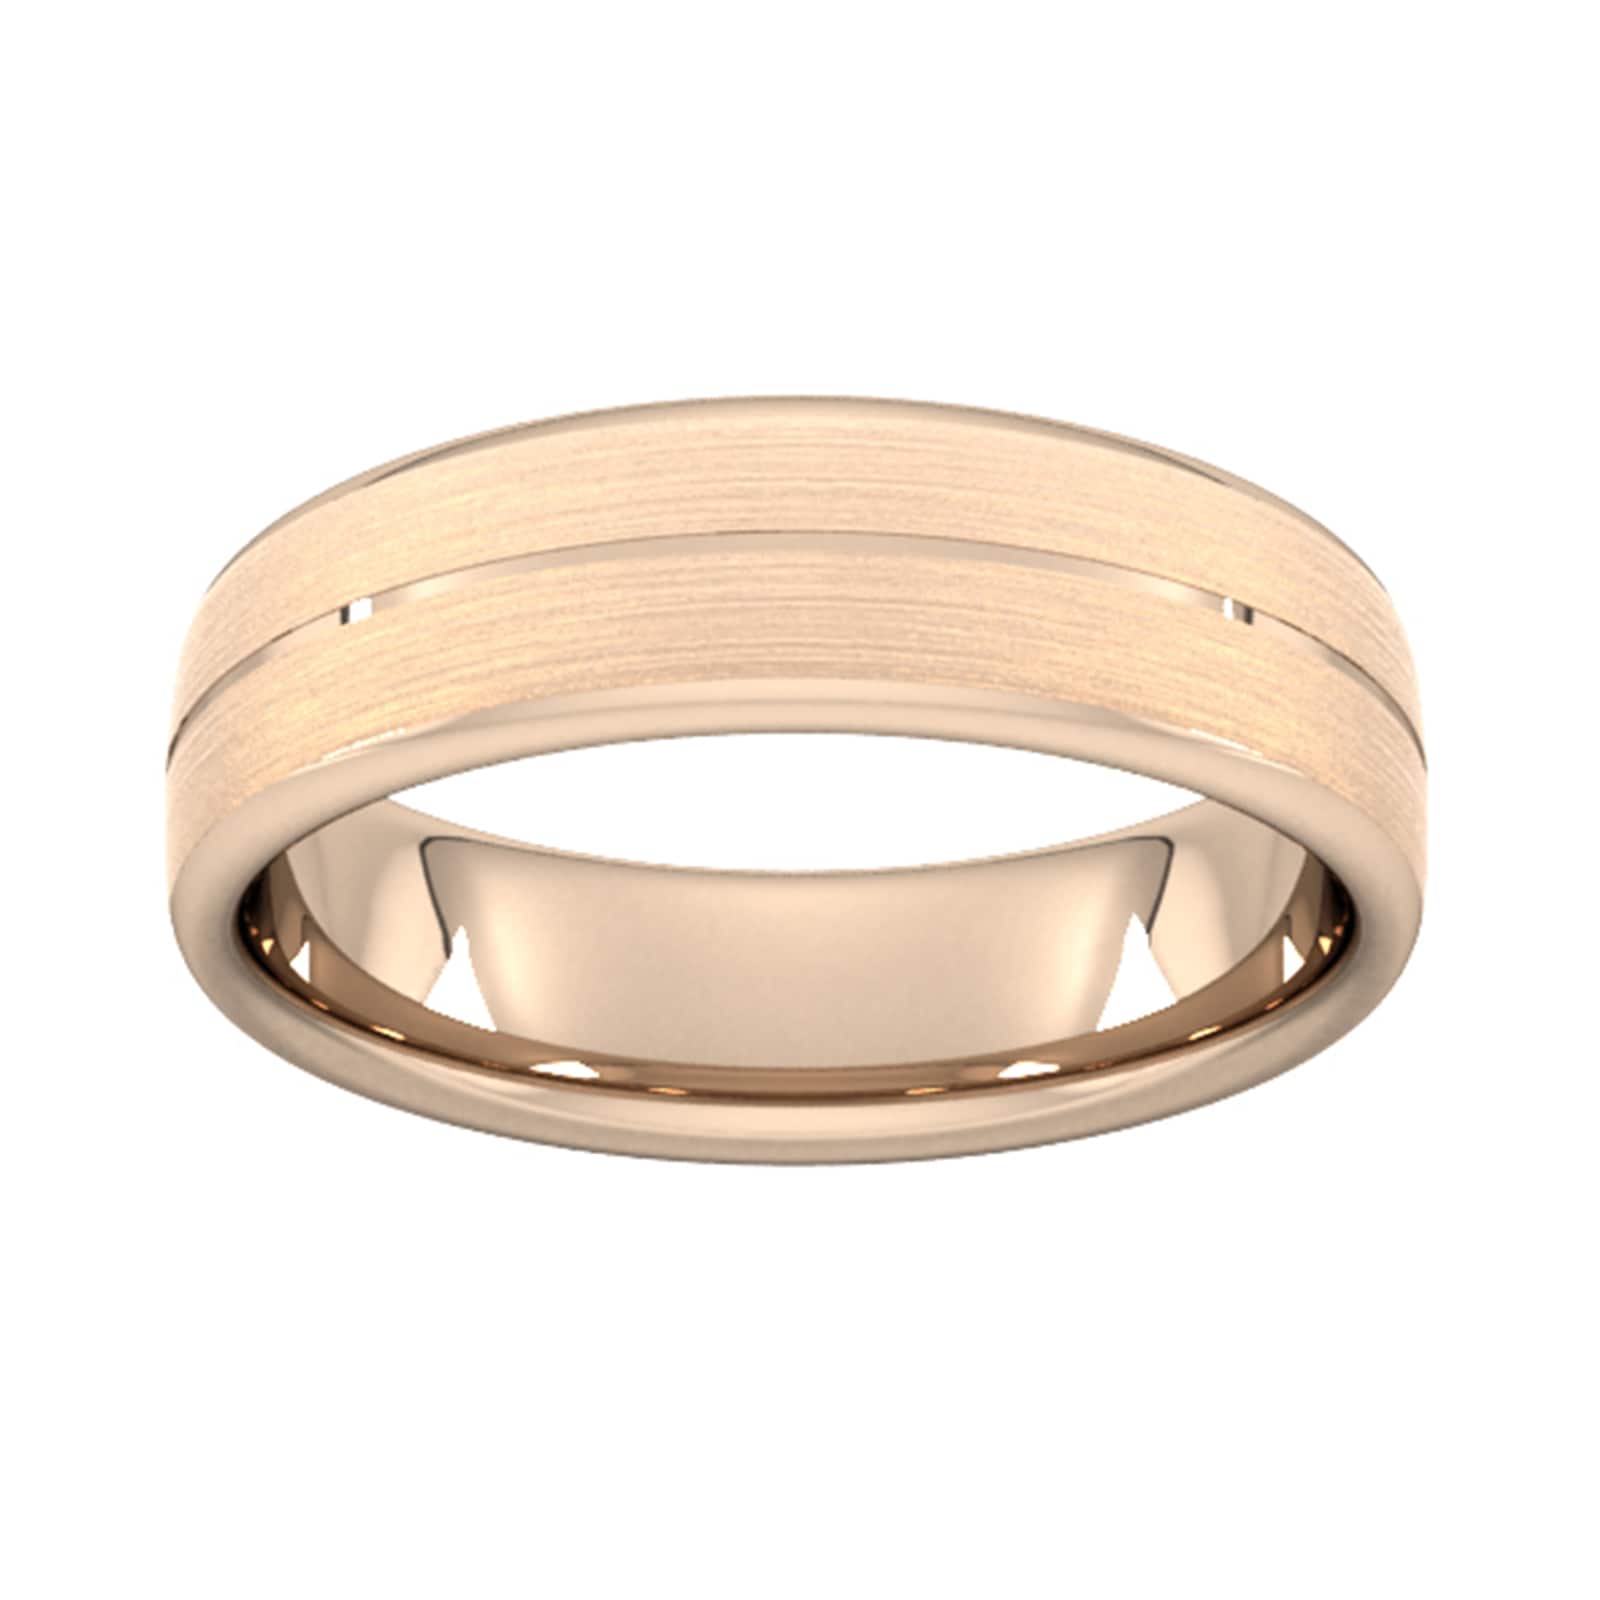 6mm Slight Court Standard Centre Groove With Chamfered Edge Wedding Ring In 9 Carat Rose Gold - Ring Size P